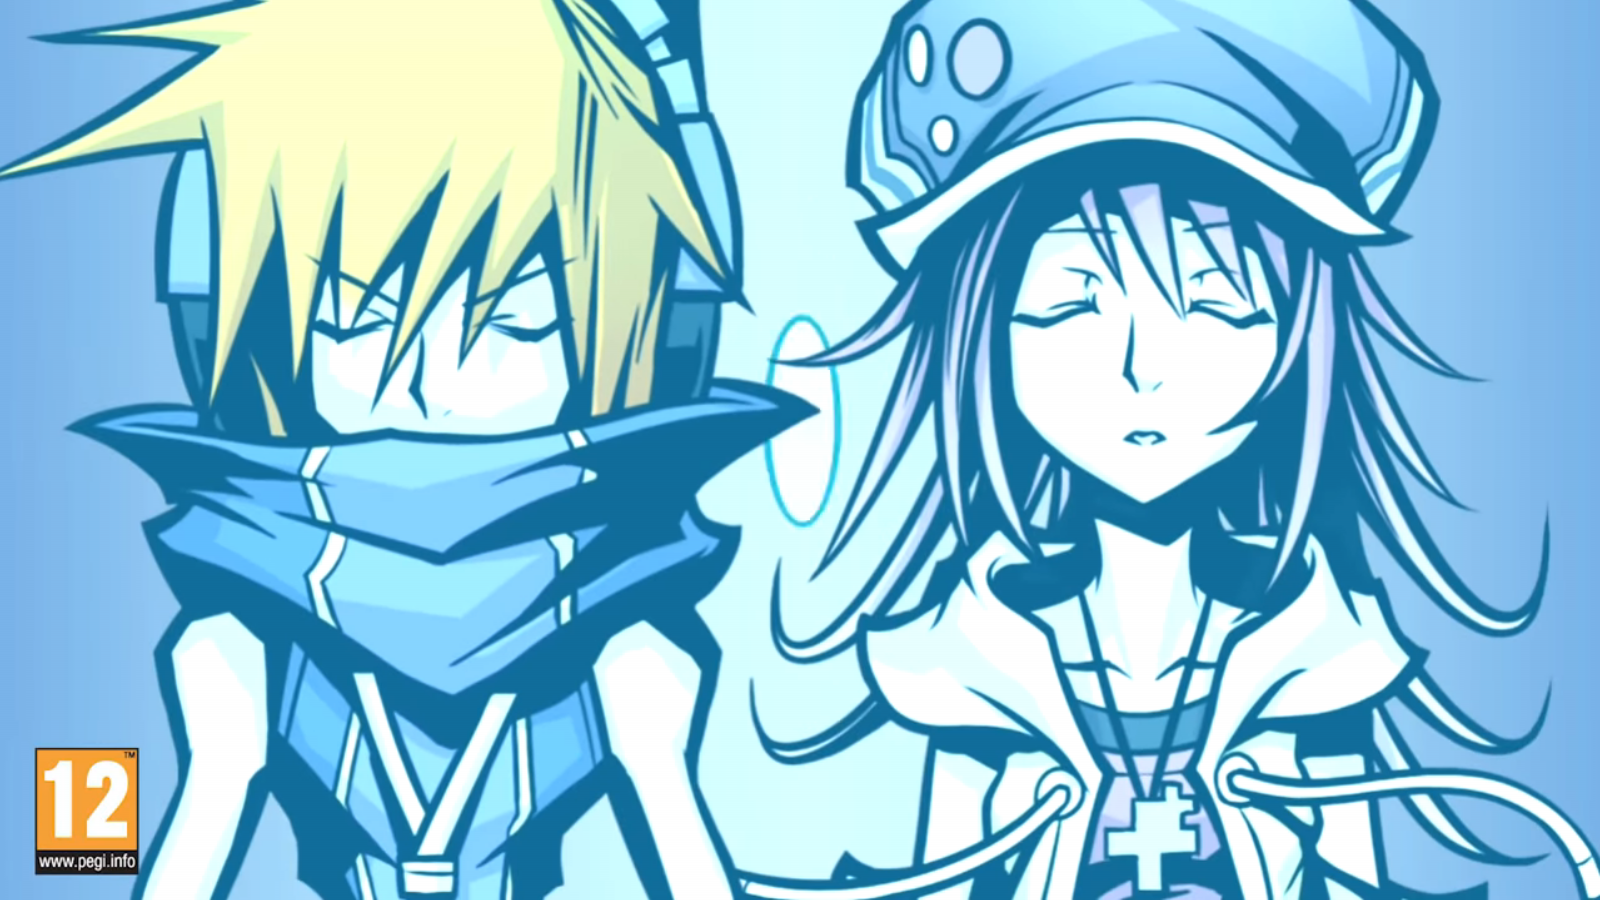 World Ends With You Neku - HD Wallpaper 